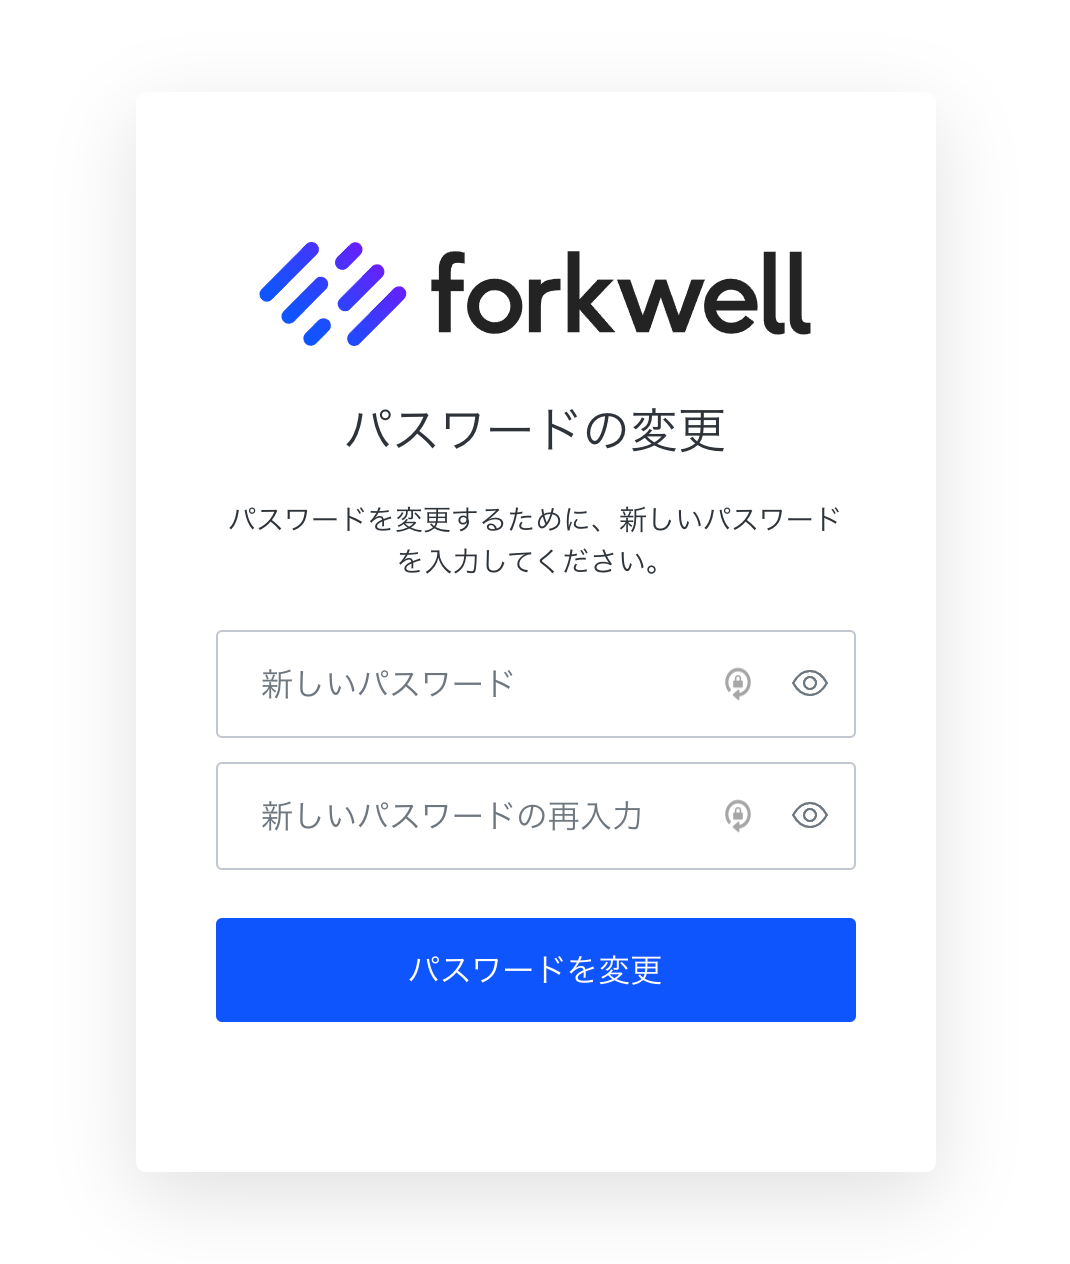 A_6.___________Forkwell____________________.png